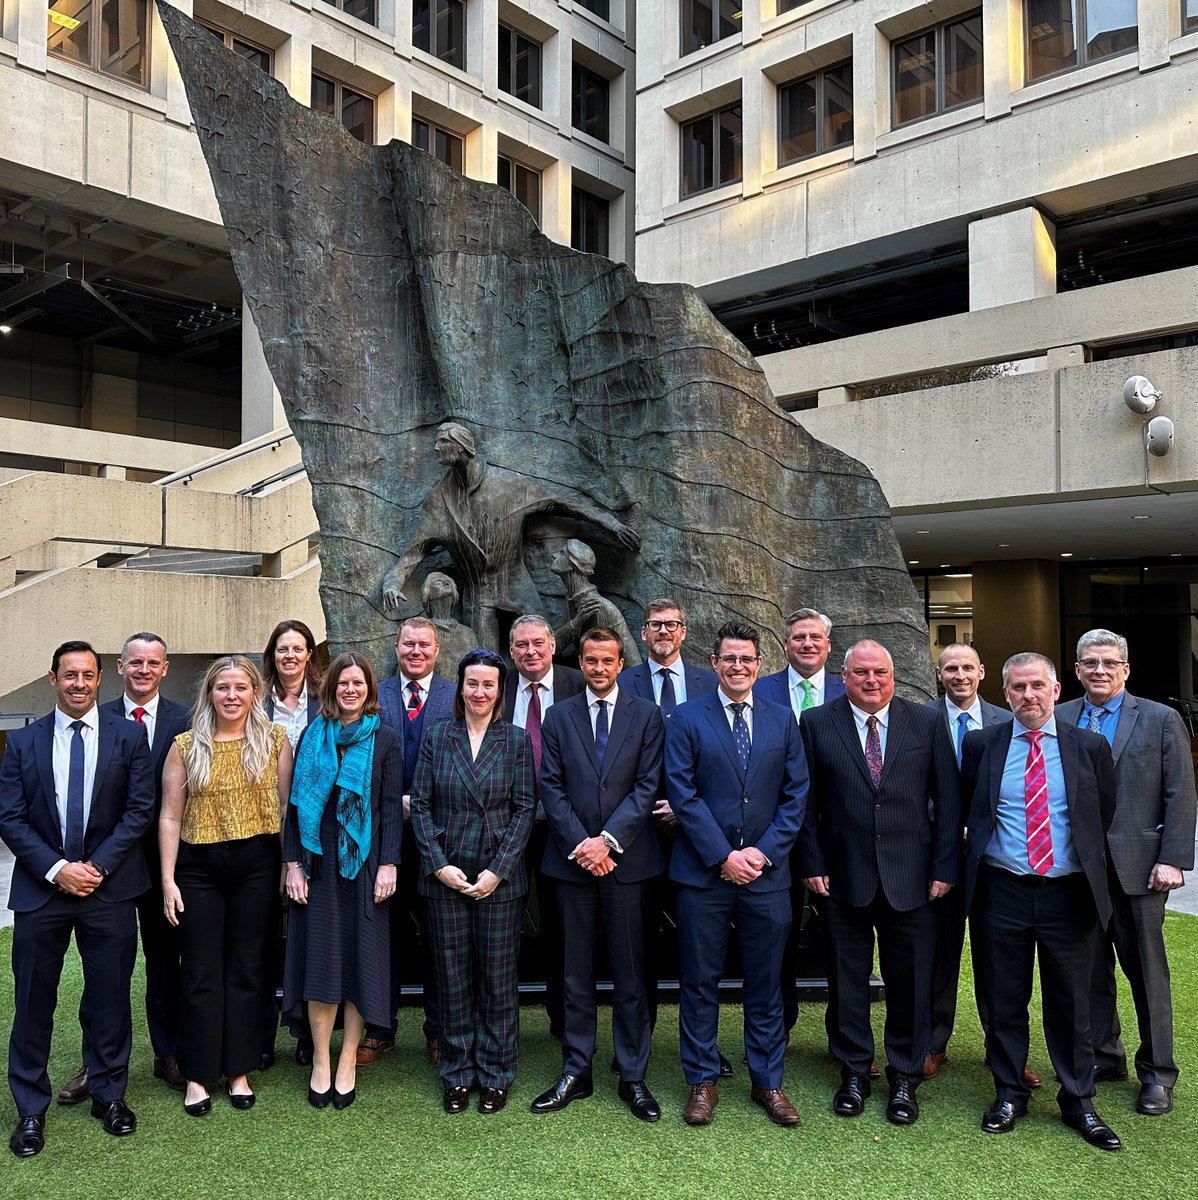 The #FBI Art Crime Team hosted a joint training at FBI Headquarters and @FBIPhiladelphia with law enforcement from the @metpoliceuk Art and Antiques Unit and the @TVP_Oxford CID, providing an opportunity to strengthen partner ties and combat cultural property crimes worldwide.